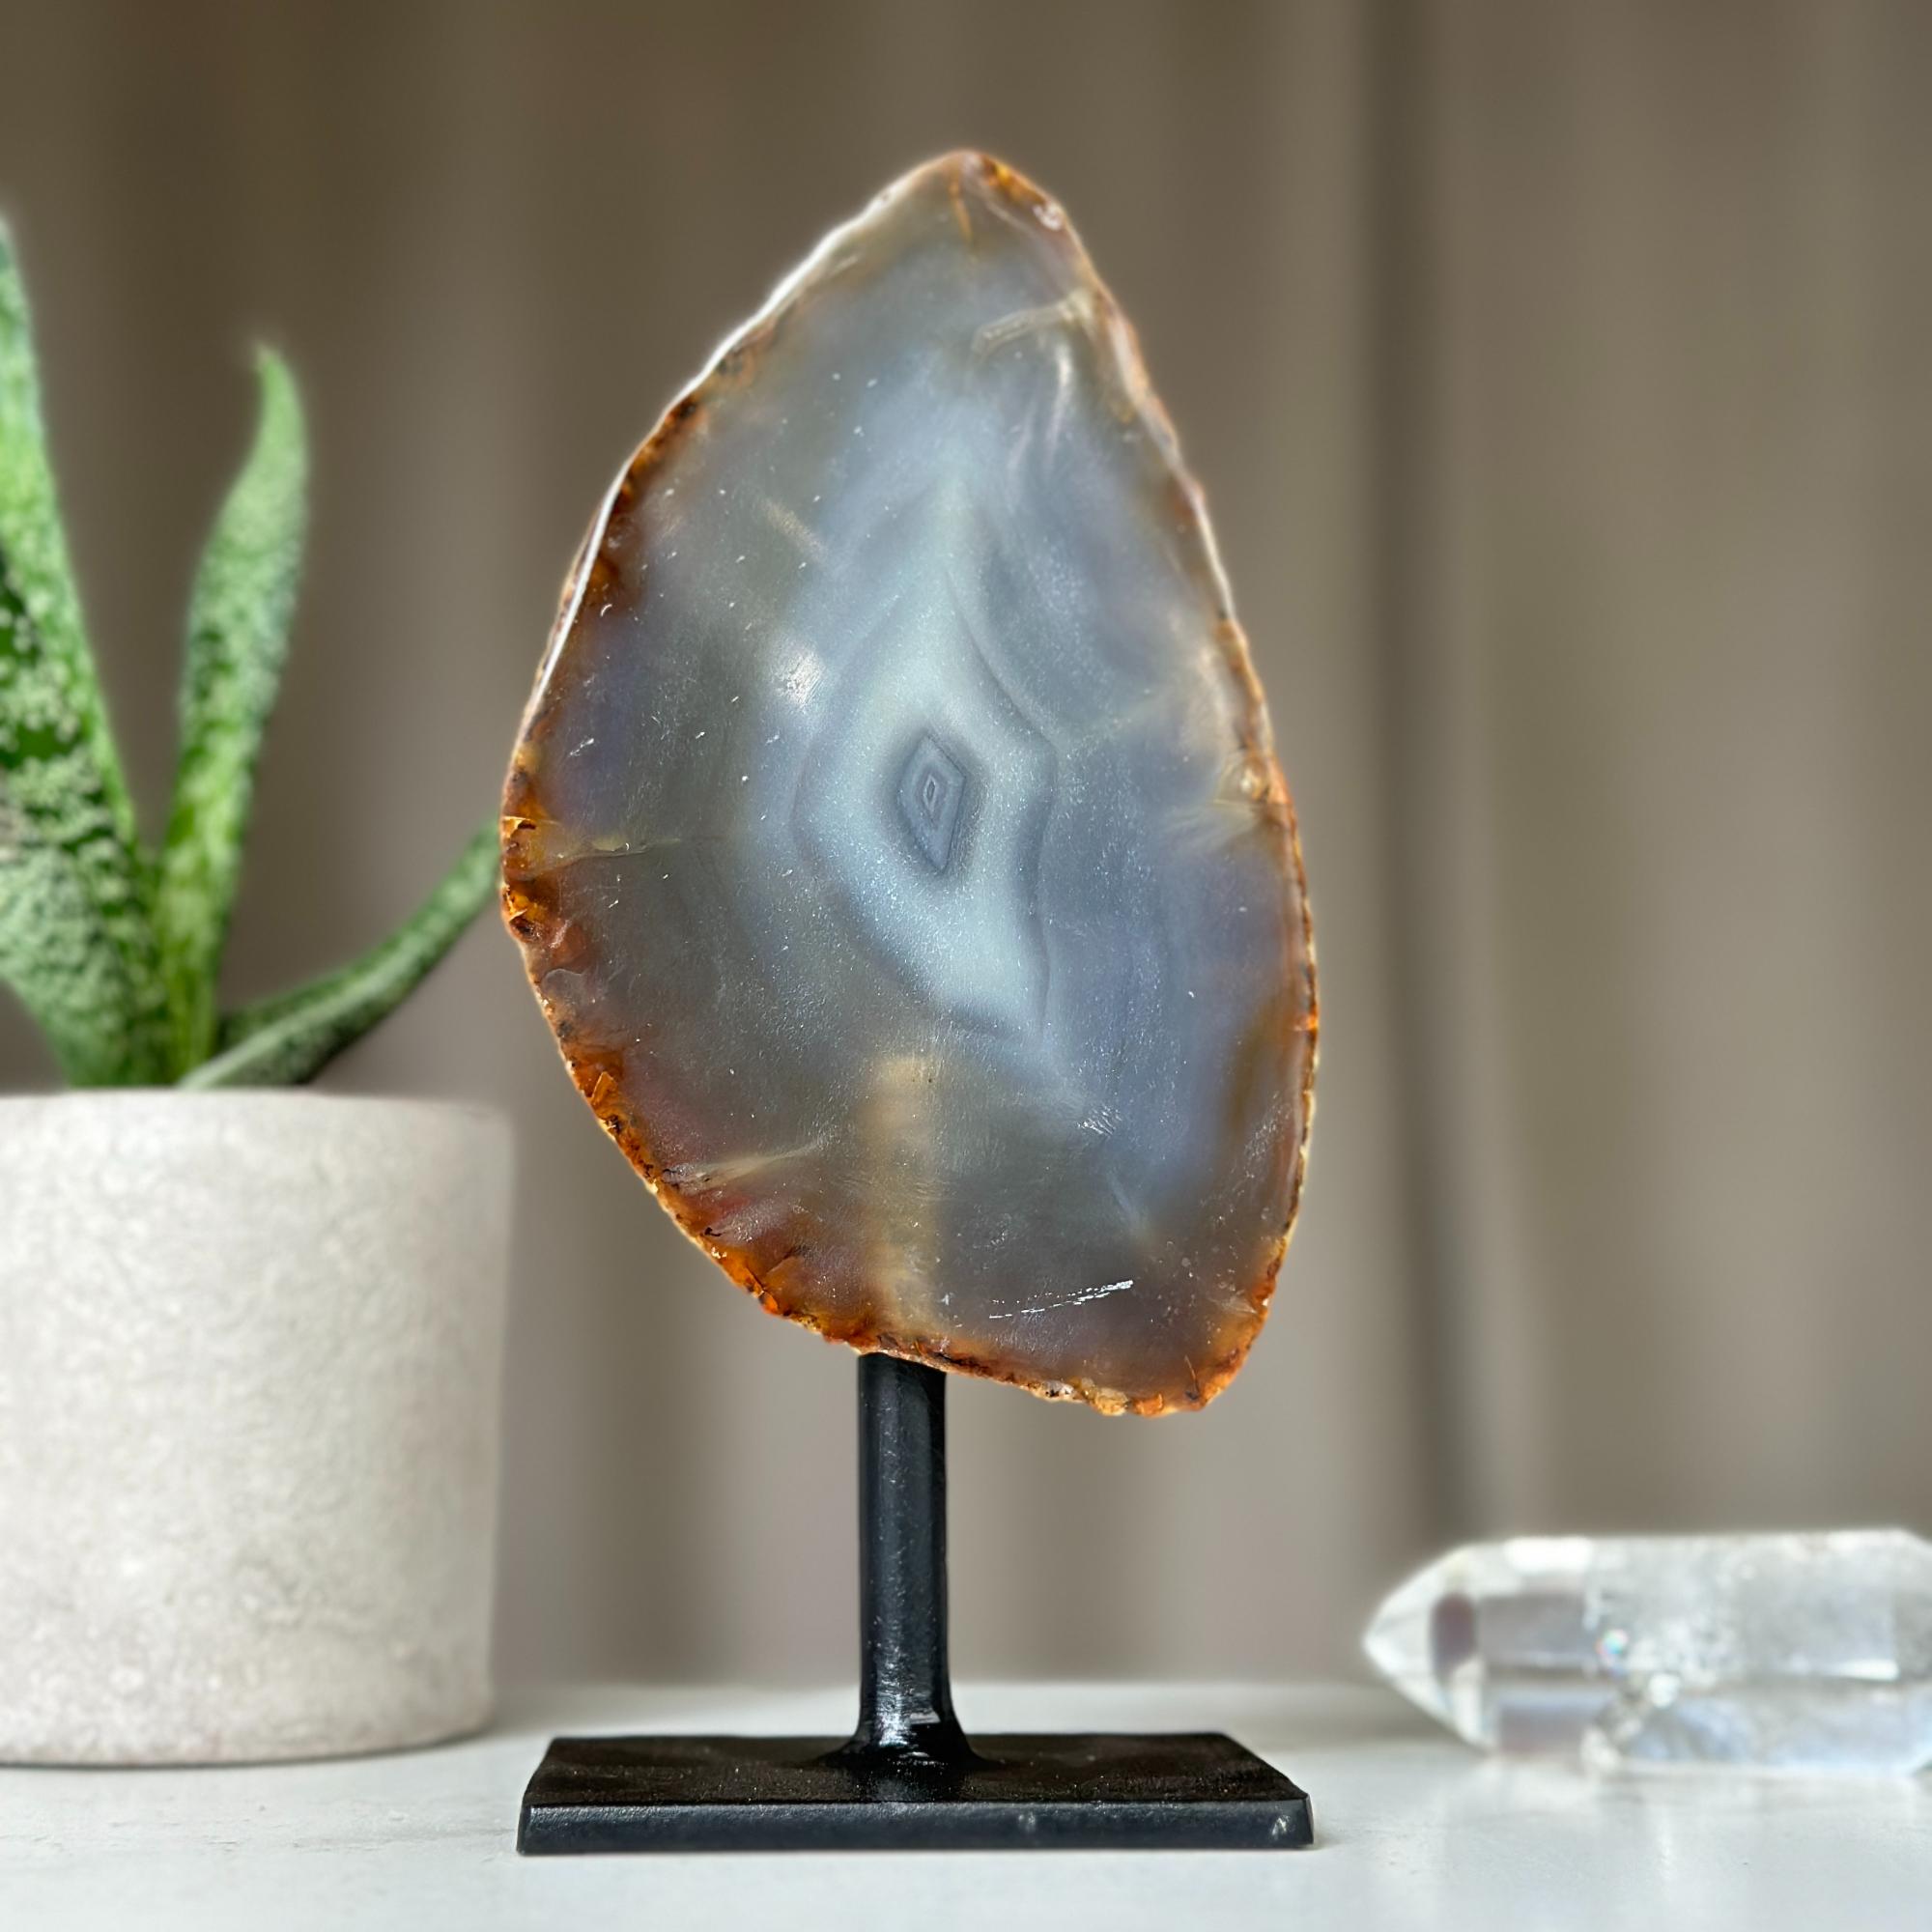 Agate Slice with metallic base included, Large Brown Agate Geode, 100% Natural Colors